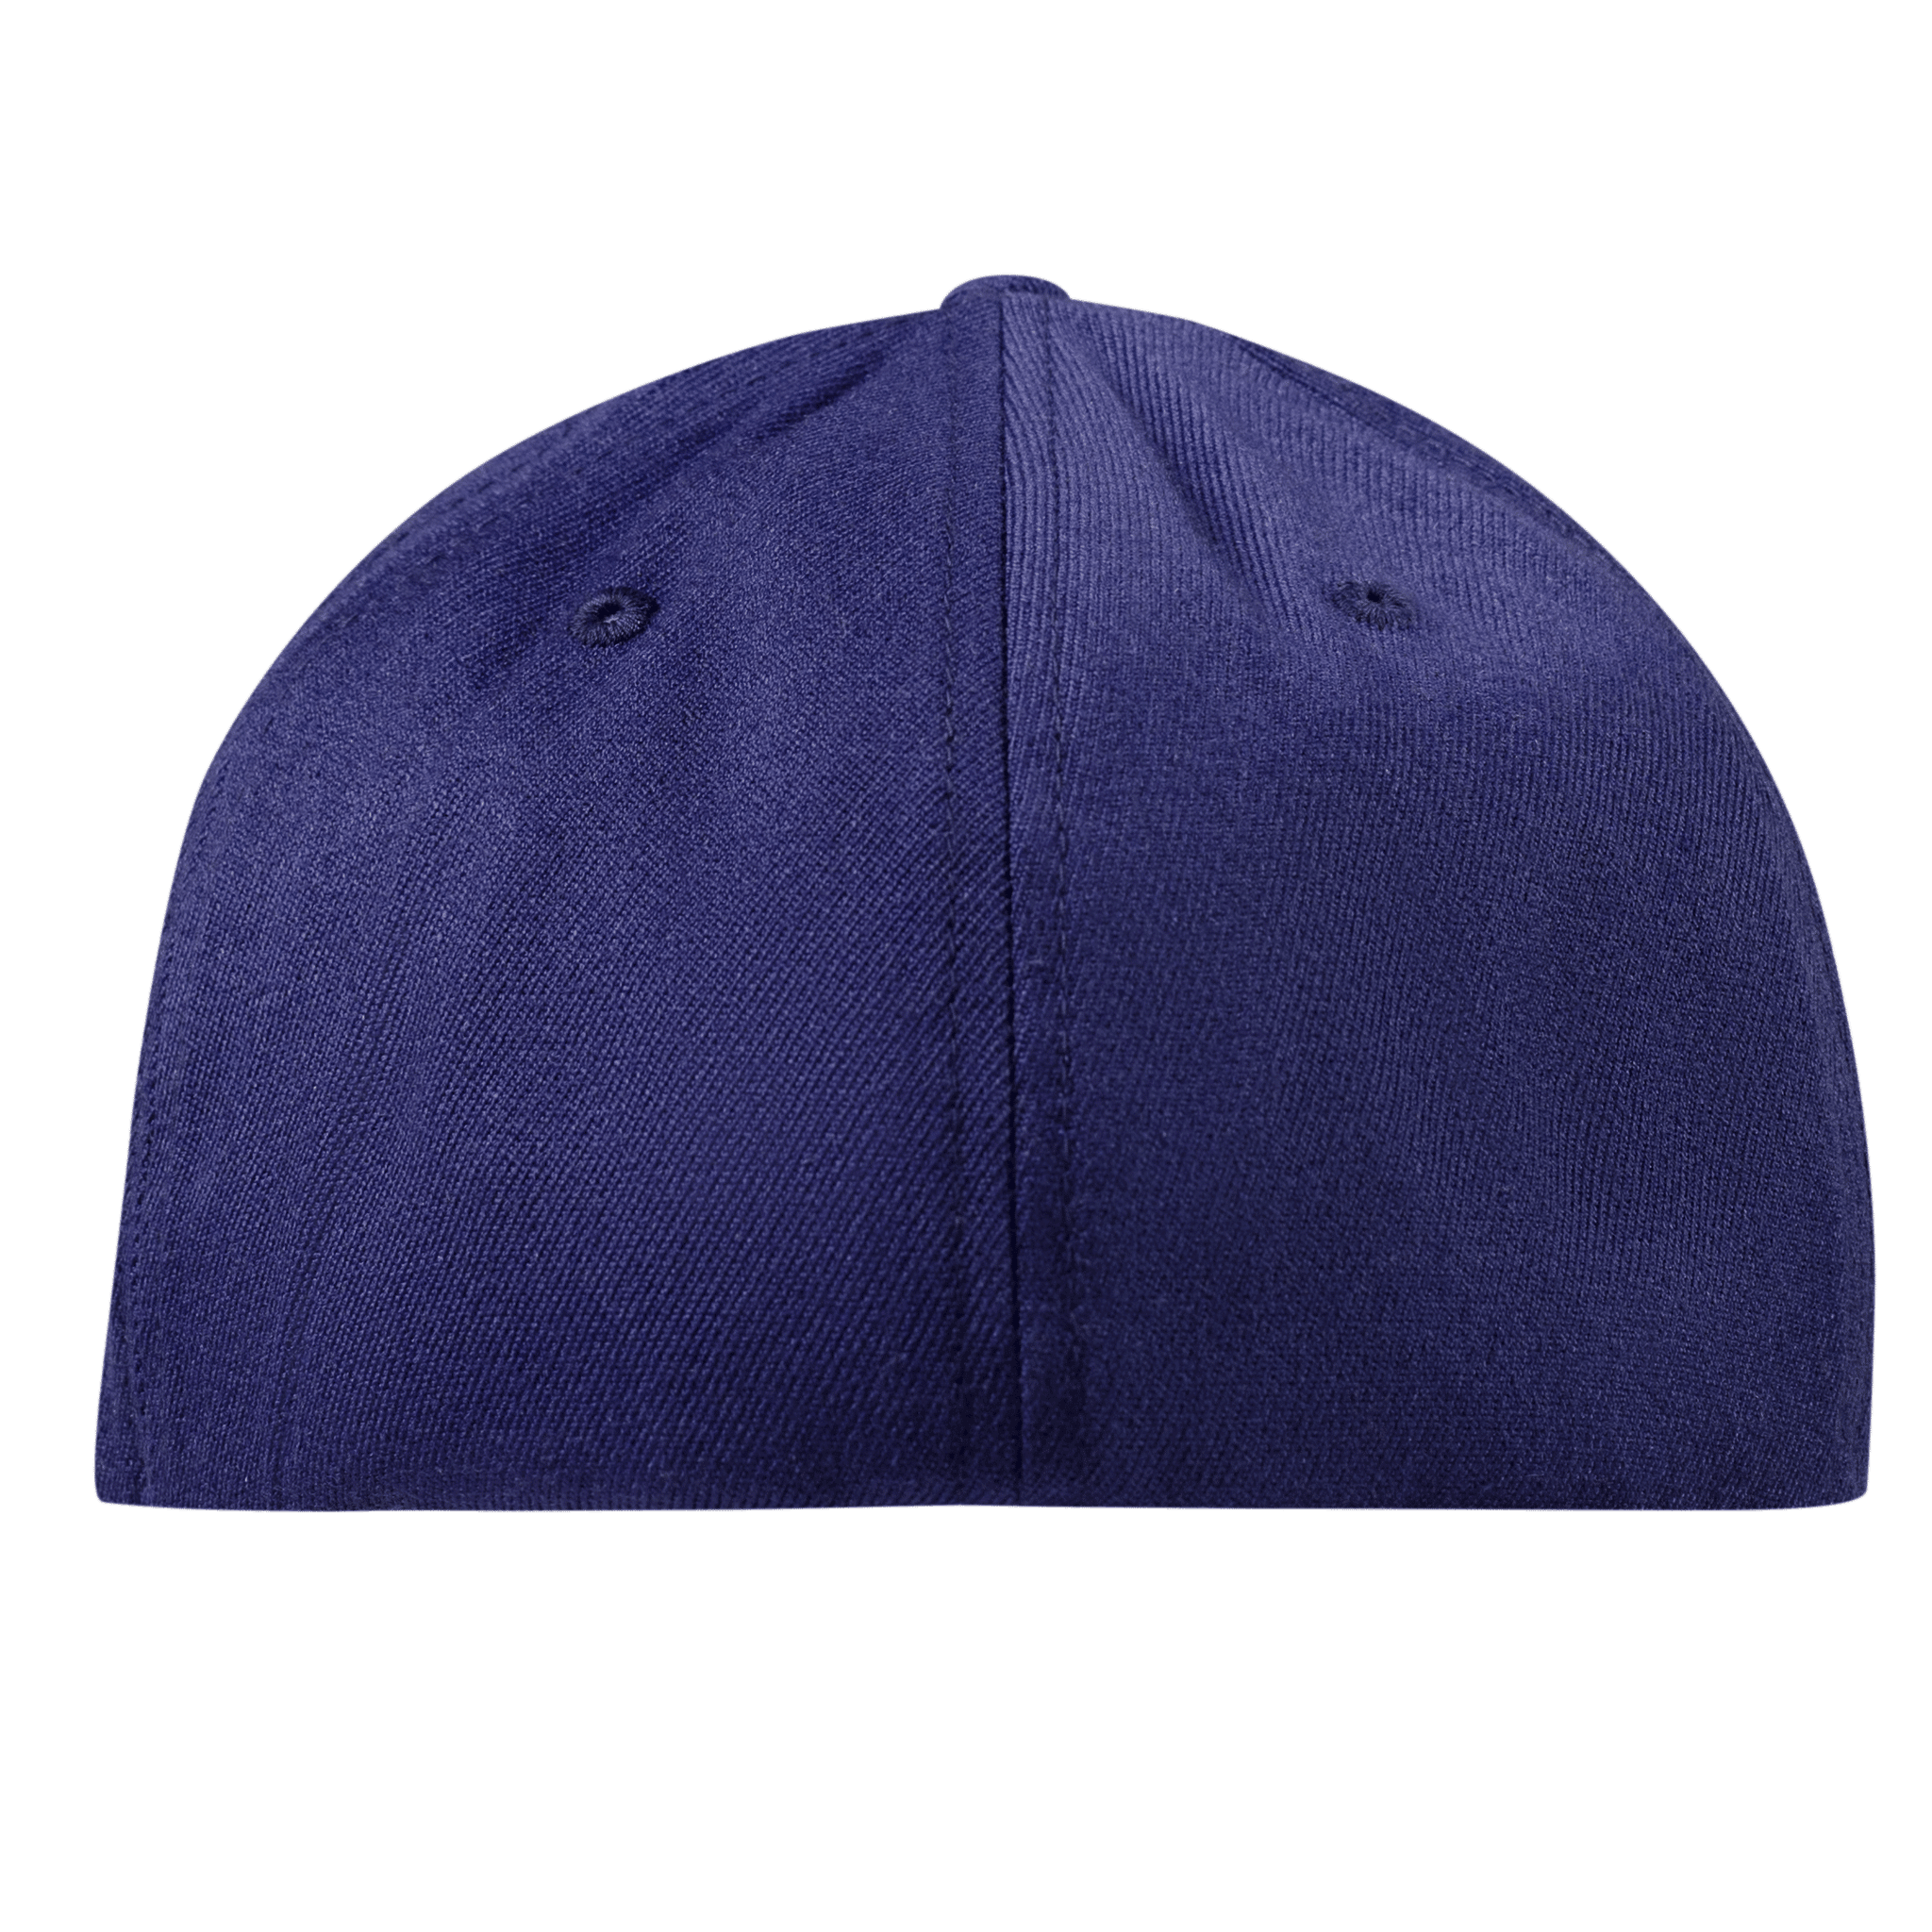 Michigan 26 PVC Flexfit Fitted Back Navy